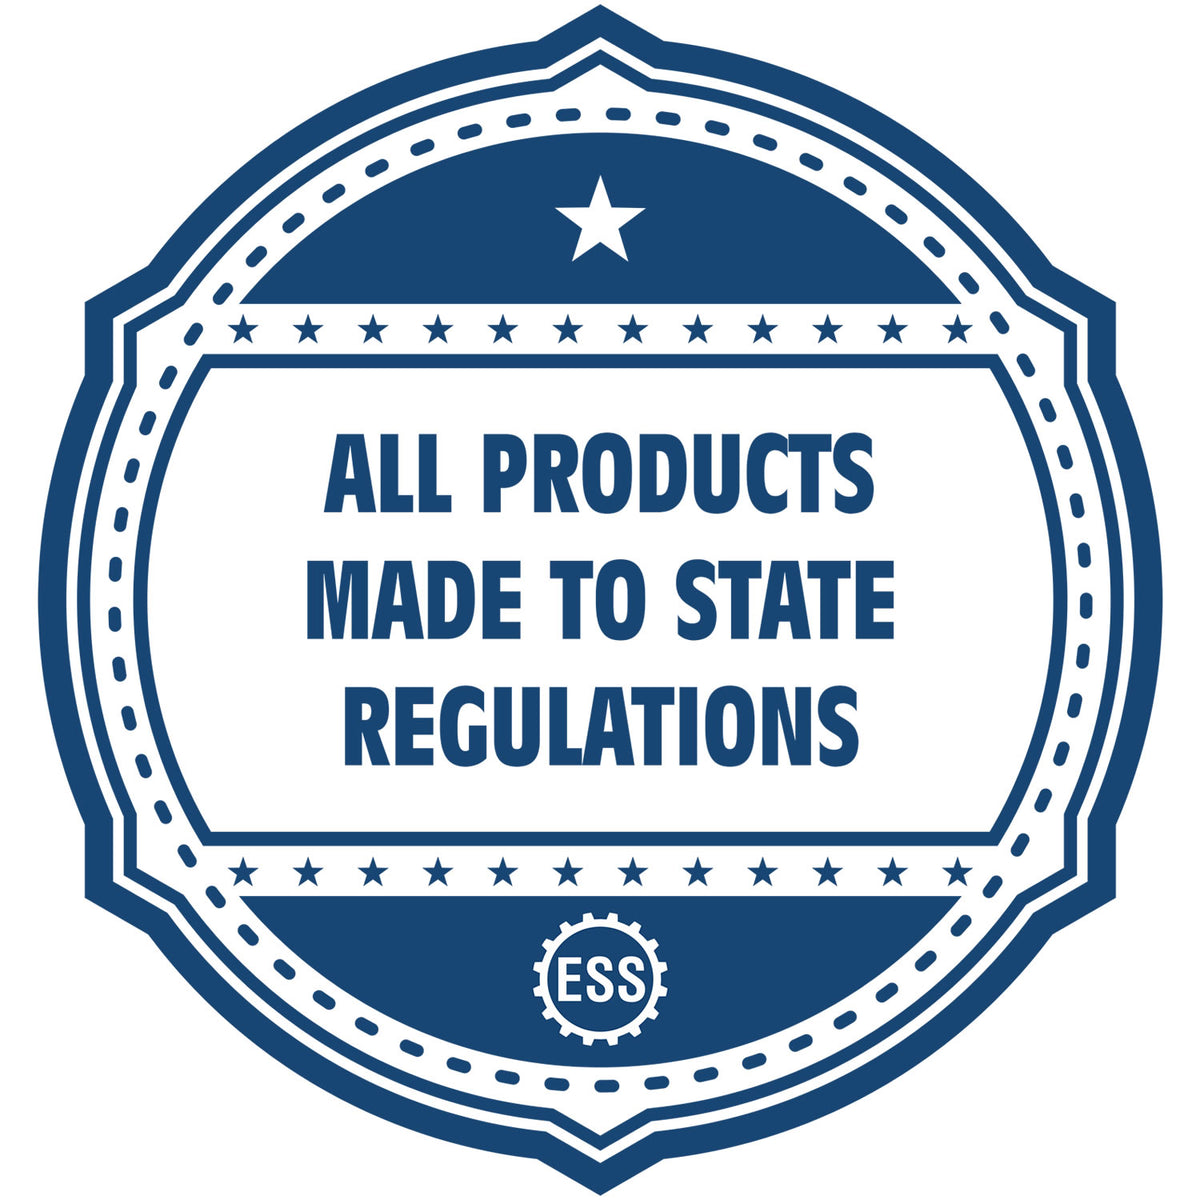 An icon or badge element for the Slim Pre-Inked Kentucky Land Surveyor Seal Stamp showing that this product is made in compliance with state regulations.